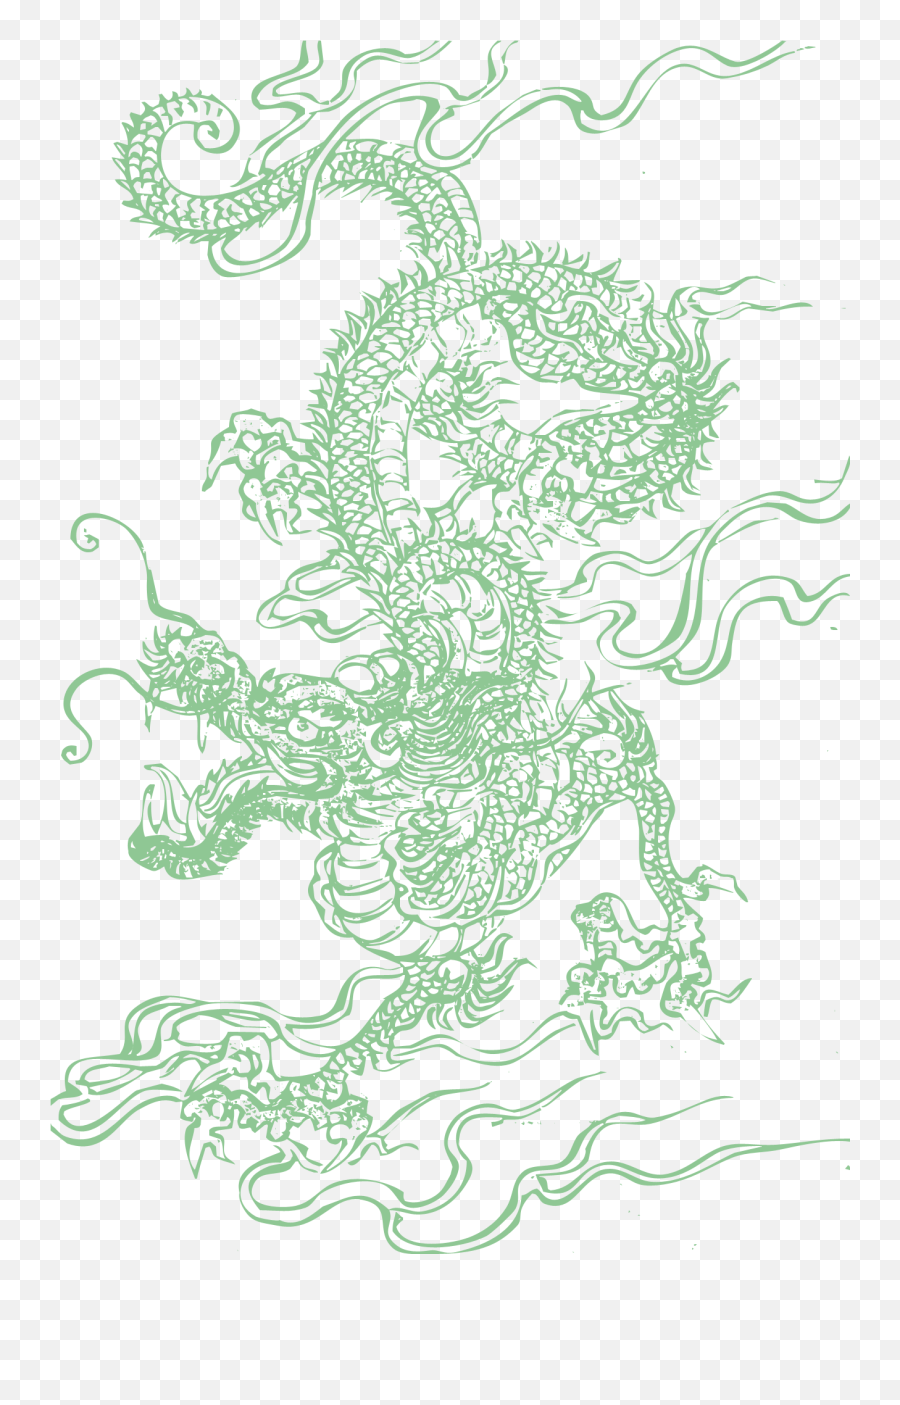 Dragon Transparent Png Pictures - Free Icons And Png Backgrounds Story Of The Chinese Dragon,Dragon Clipart Transparent Background